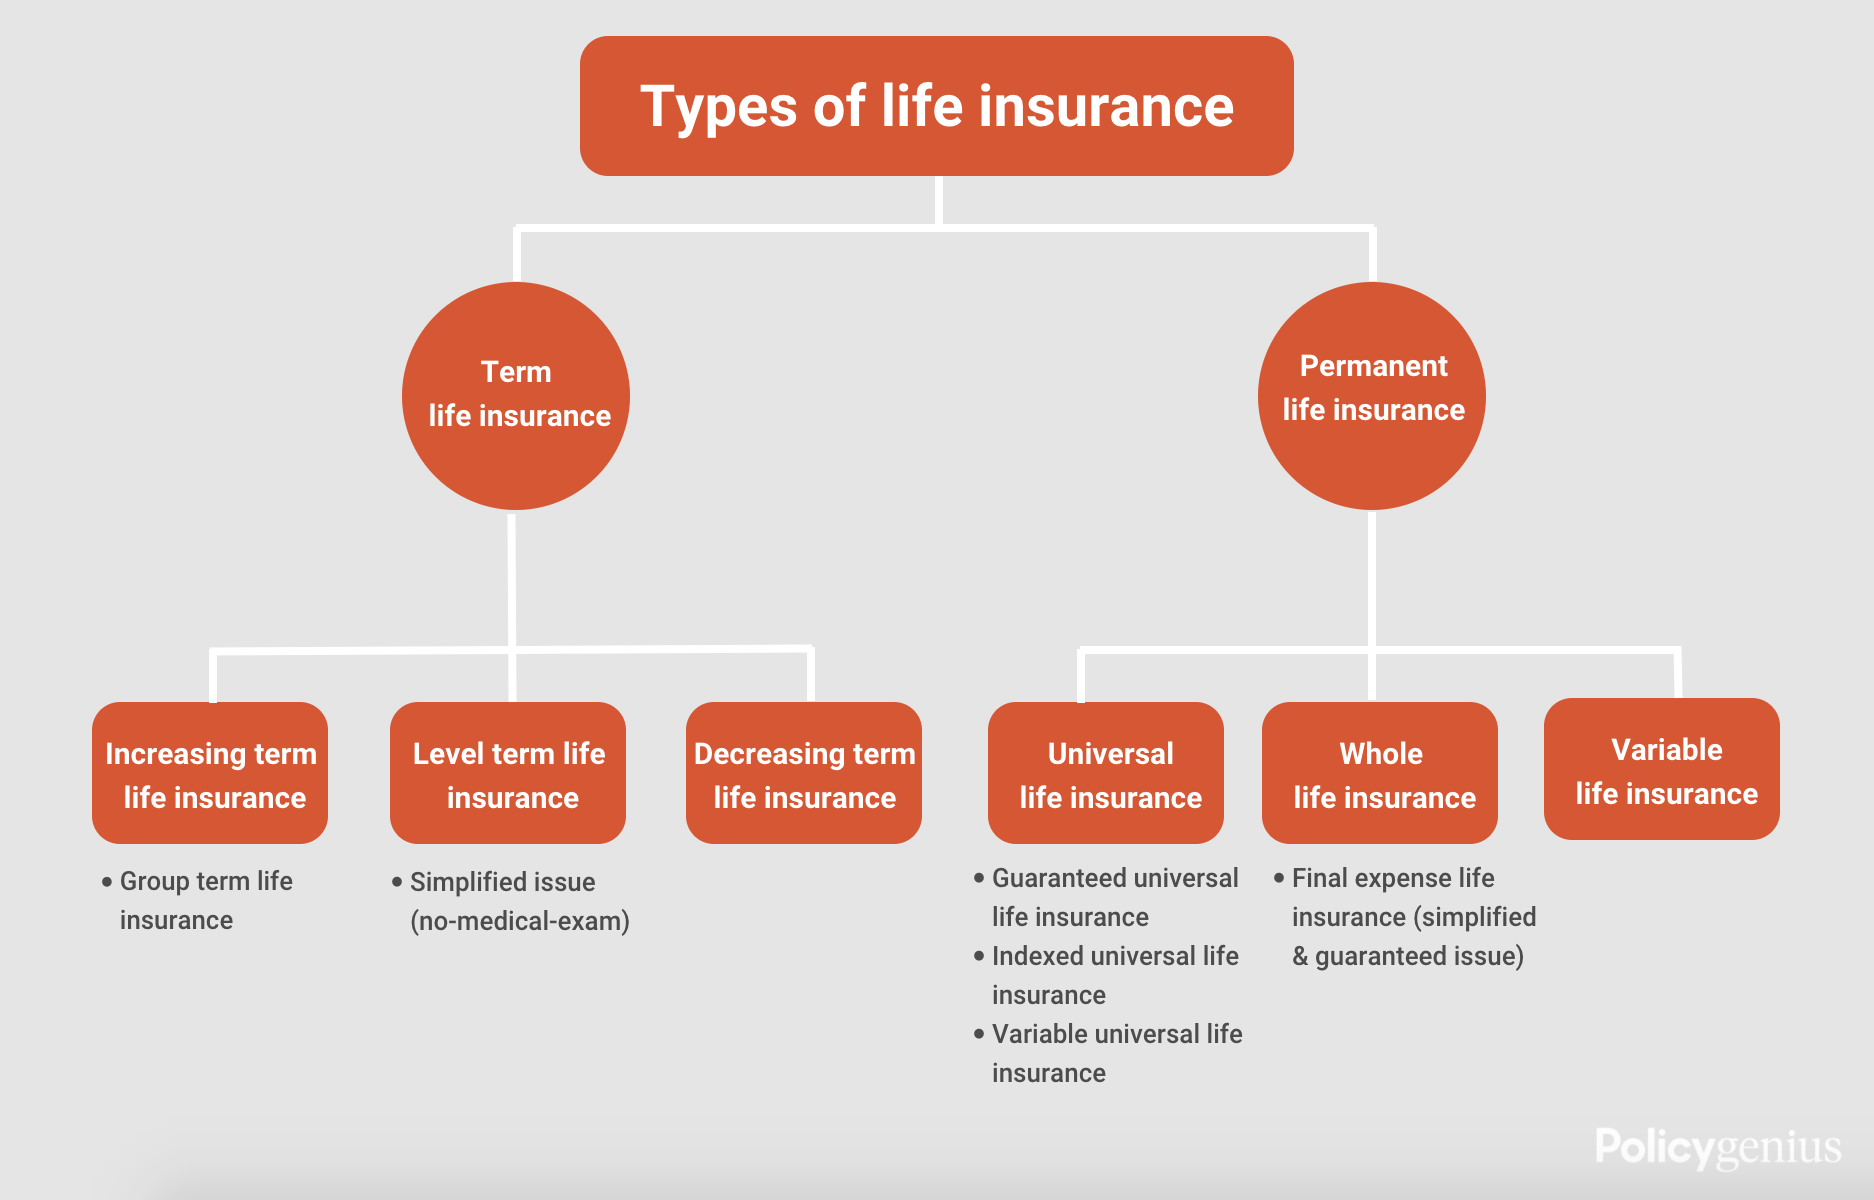 what are the 3 main types of life insurance?